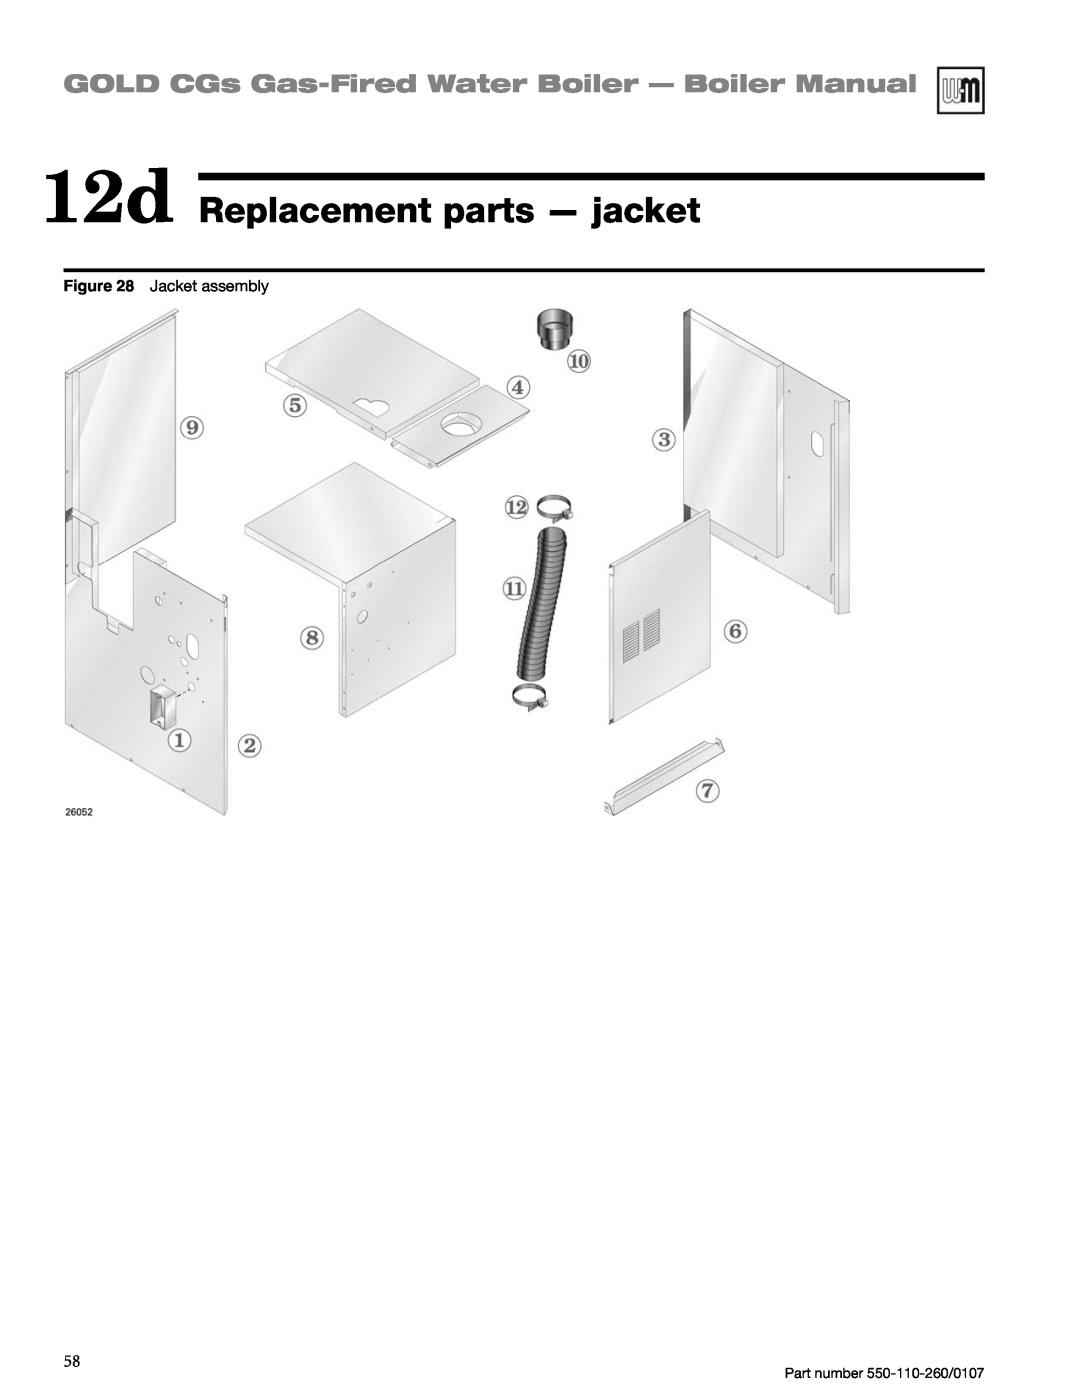 Weil-McLain 550-110-260/0107 manual 12d Replacement parts — jacket, GOLD CGs Gas-FiredWater Boiler — Boiler Manual 